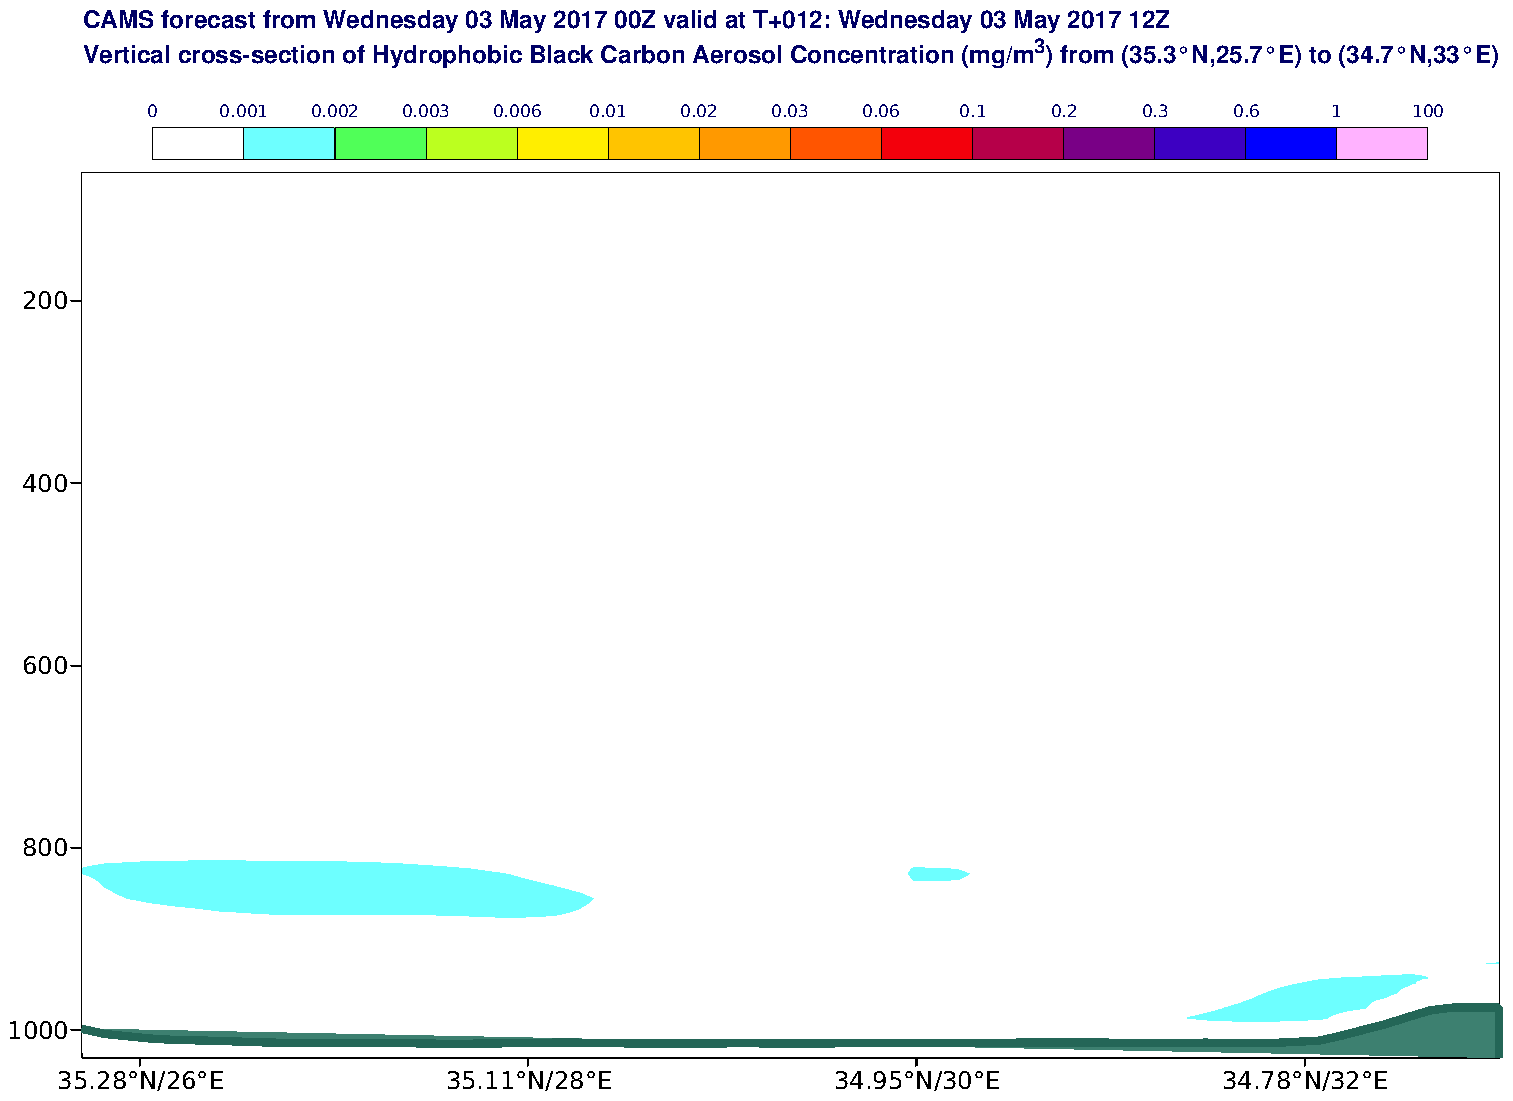 Vertical cross-section of Hydrophobic Black Carbon Aerosol Concentration (mg/m3) valid at T12 - 2017-05-03 12:00